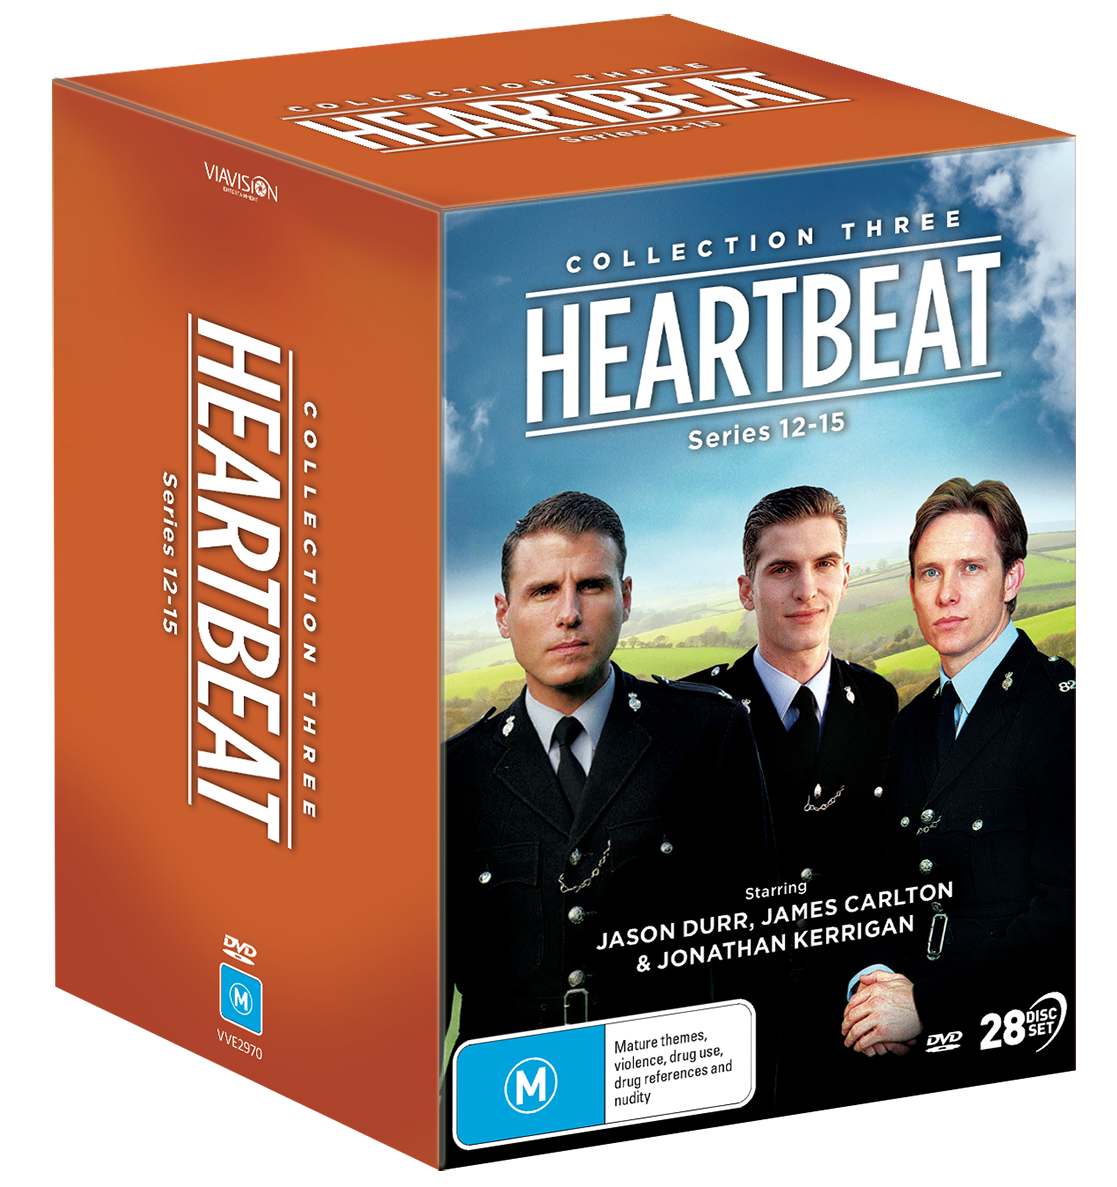 Heartbeat Collection Three Series 12 15 Via Vision Entertainment